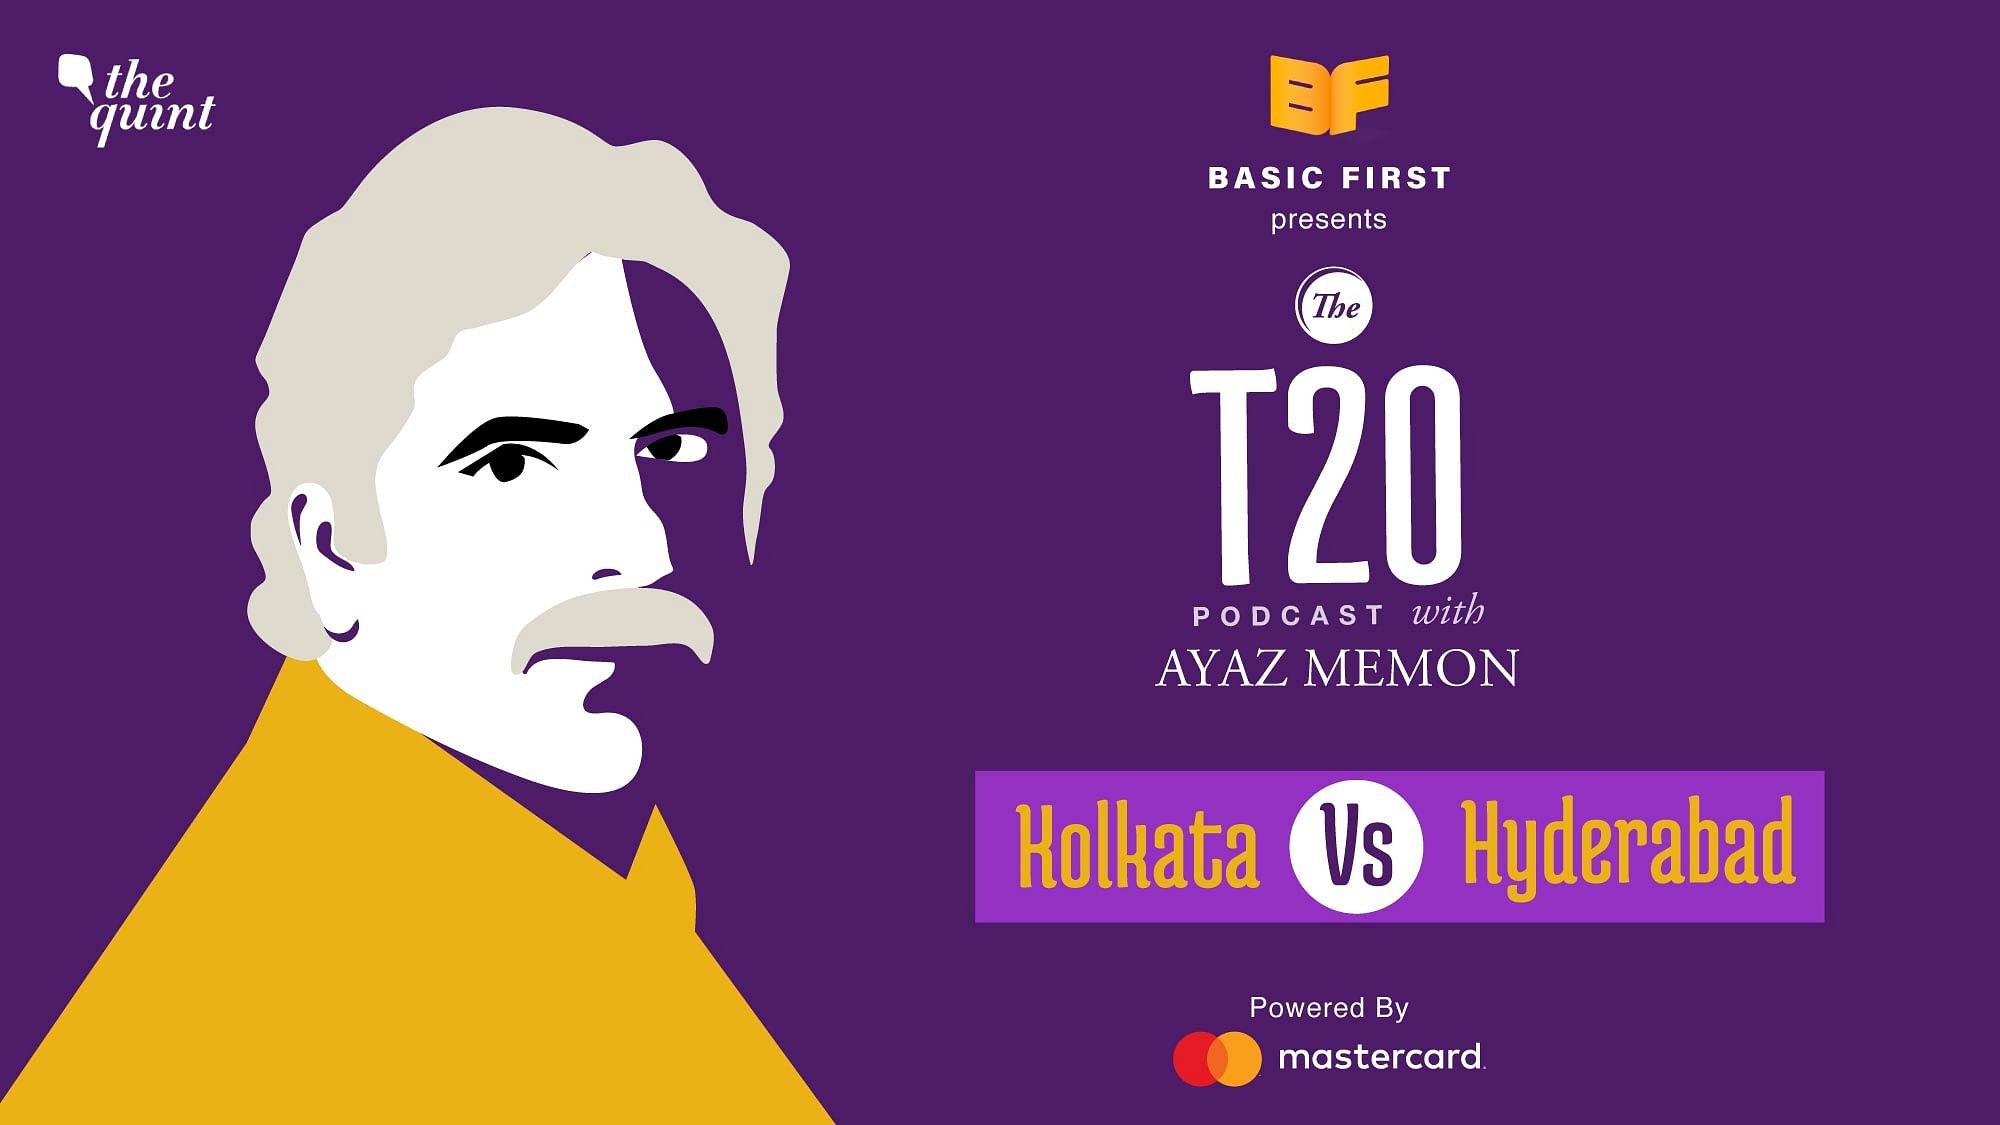 On episode 8 of The T20 Podcast, Ayaz Memon and I discuss Kolkata’s comfortable victory over Hyderabad in Abu Dhabi on Saturday night.